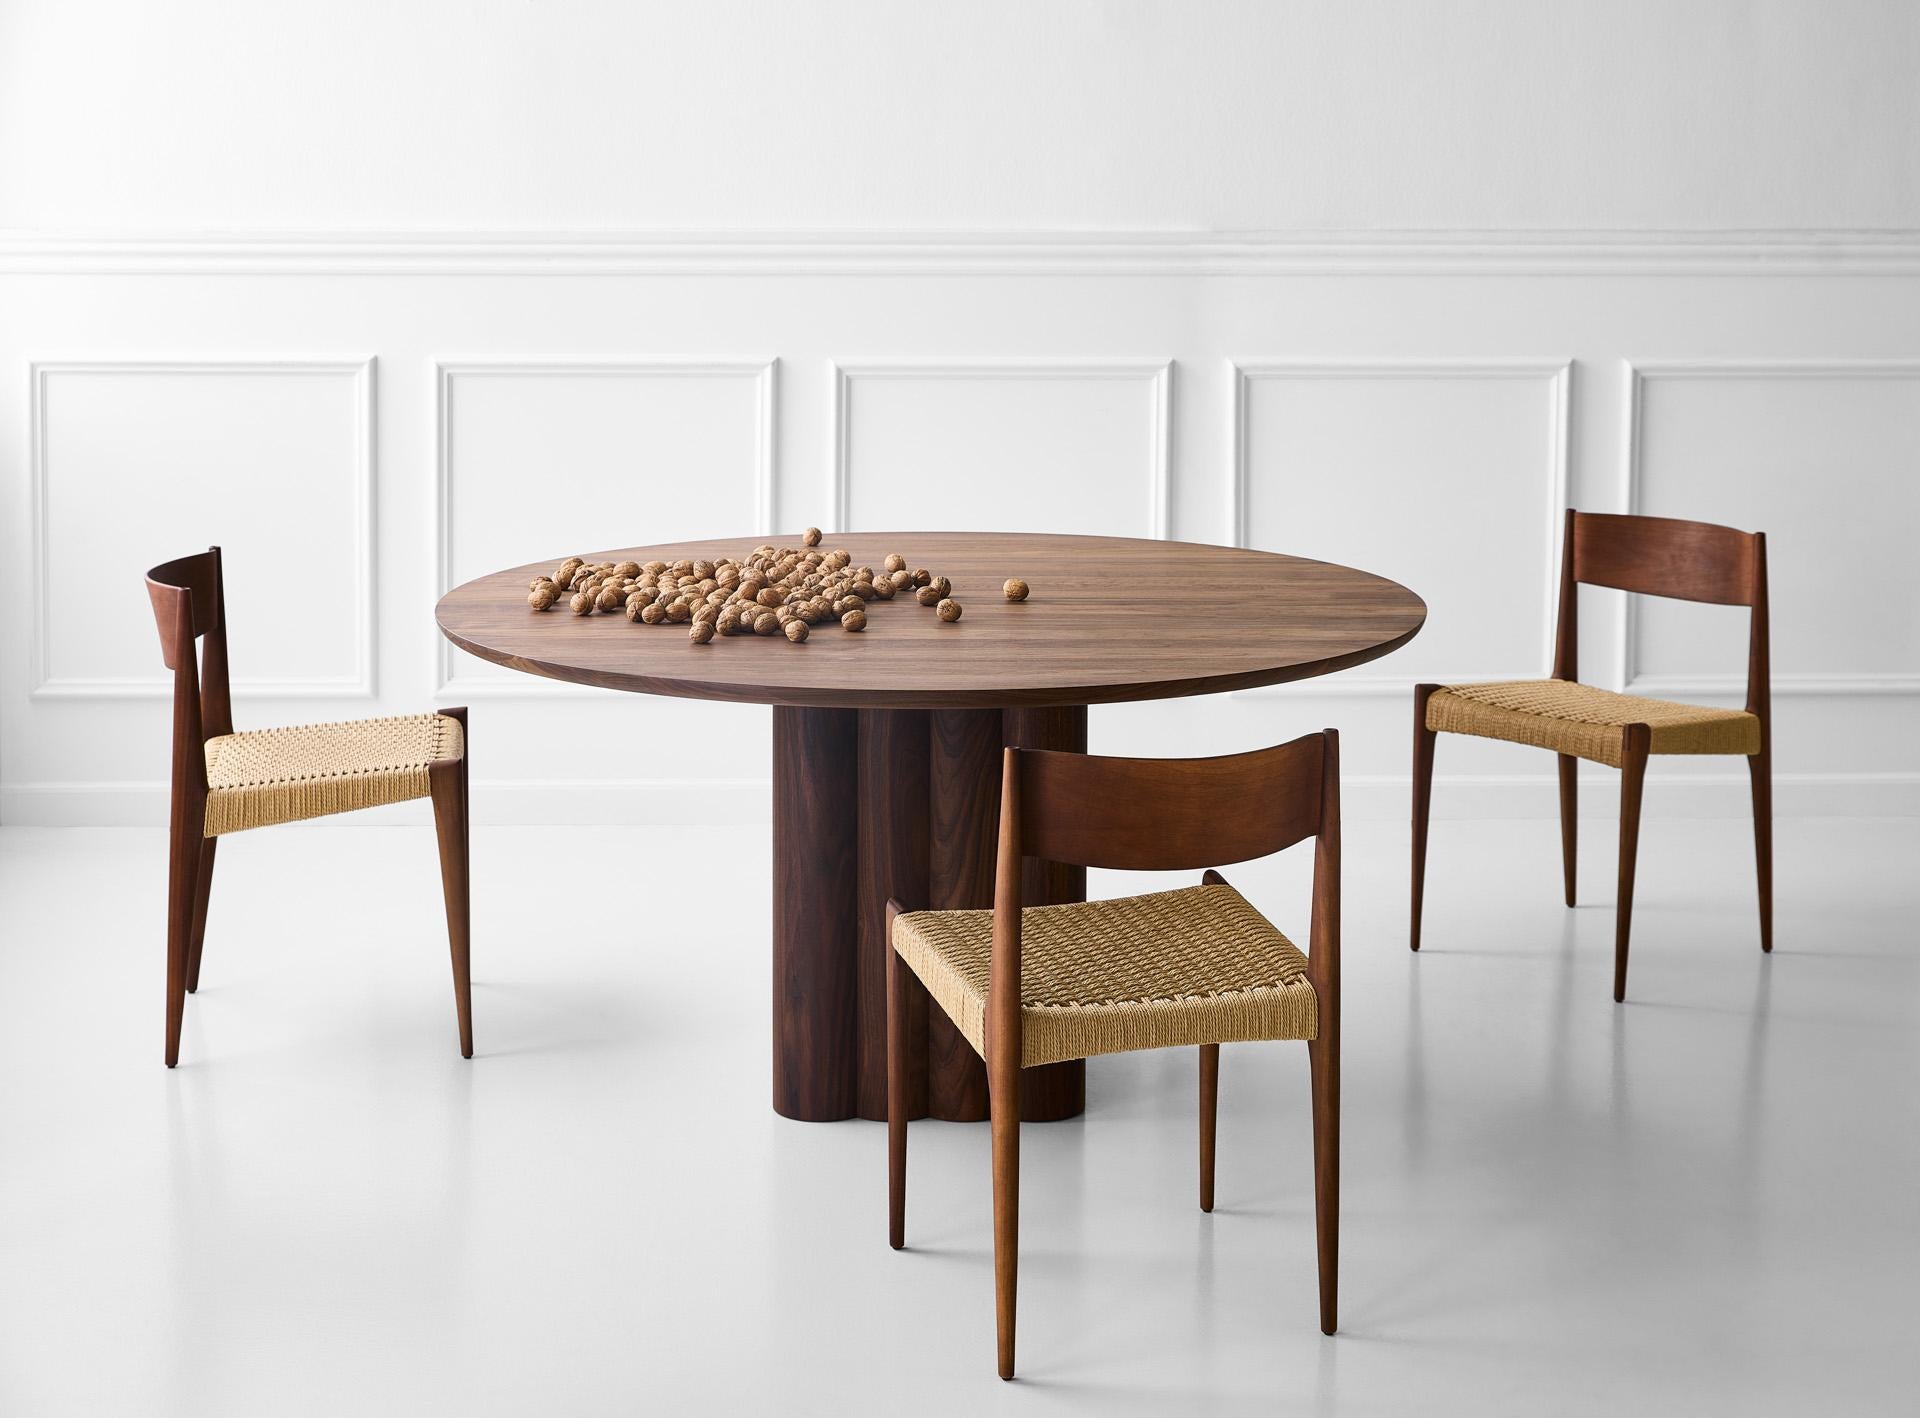 PLUSH dining table, round, 140 cm.
Solid wood table top and legs. Handmade in Denmark. 
Signed by Jacob Plejdrup for DK3

Table's height: 72 or 74 cm

Sold model: 
Natural Oak (oil treatment)
Cube base: 46x46 cm
Table top Thickness: 30